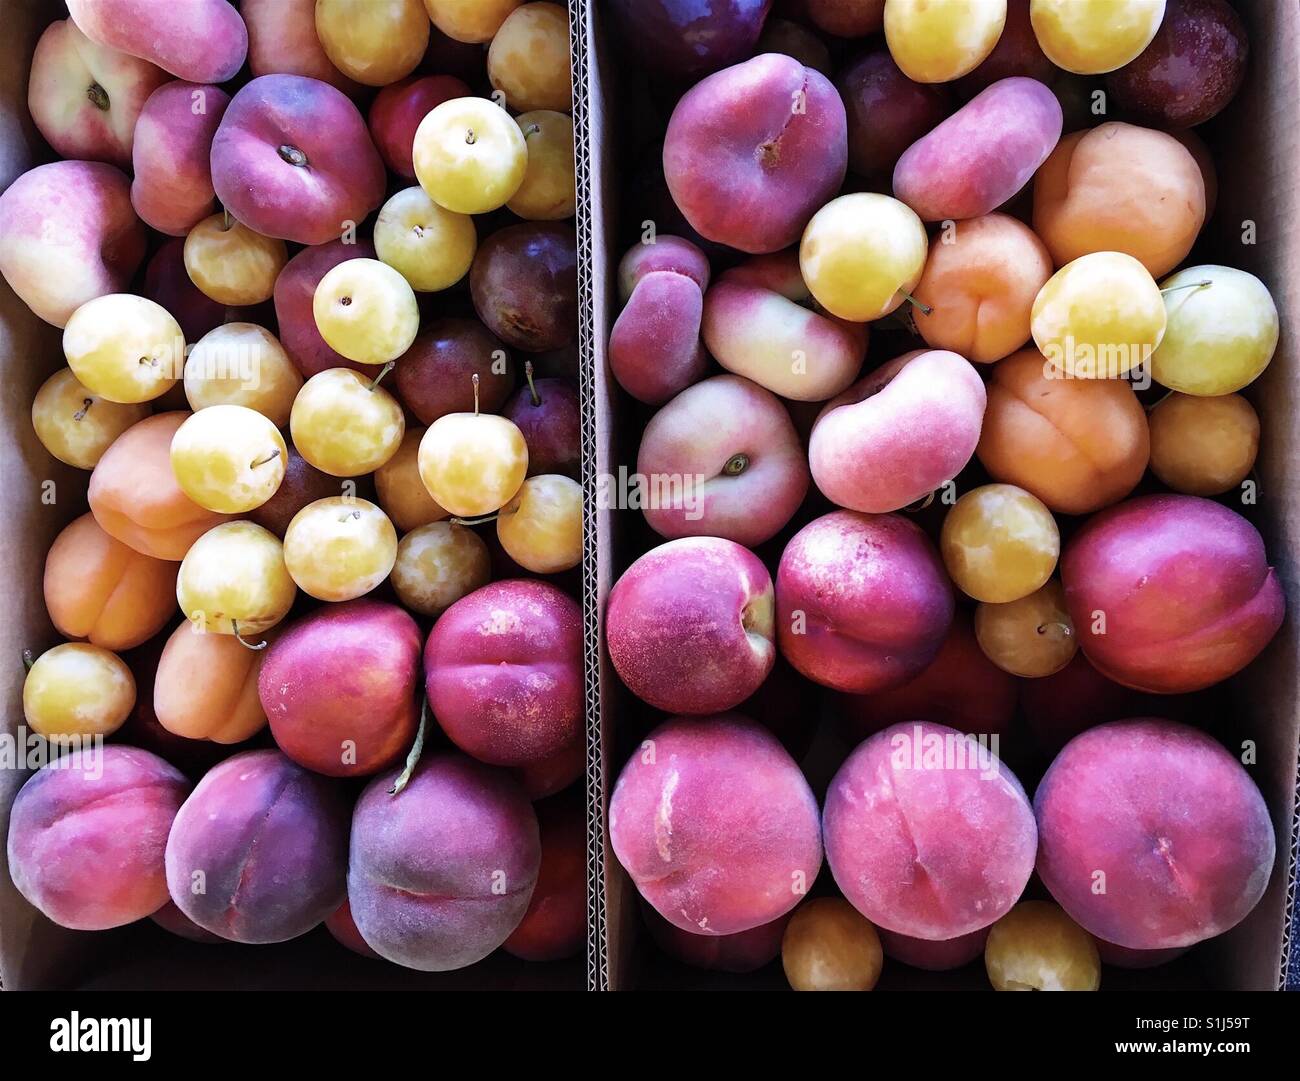 Box of summer fruit - peaches, plums, apricots, nectarines Stock Photo